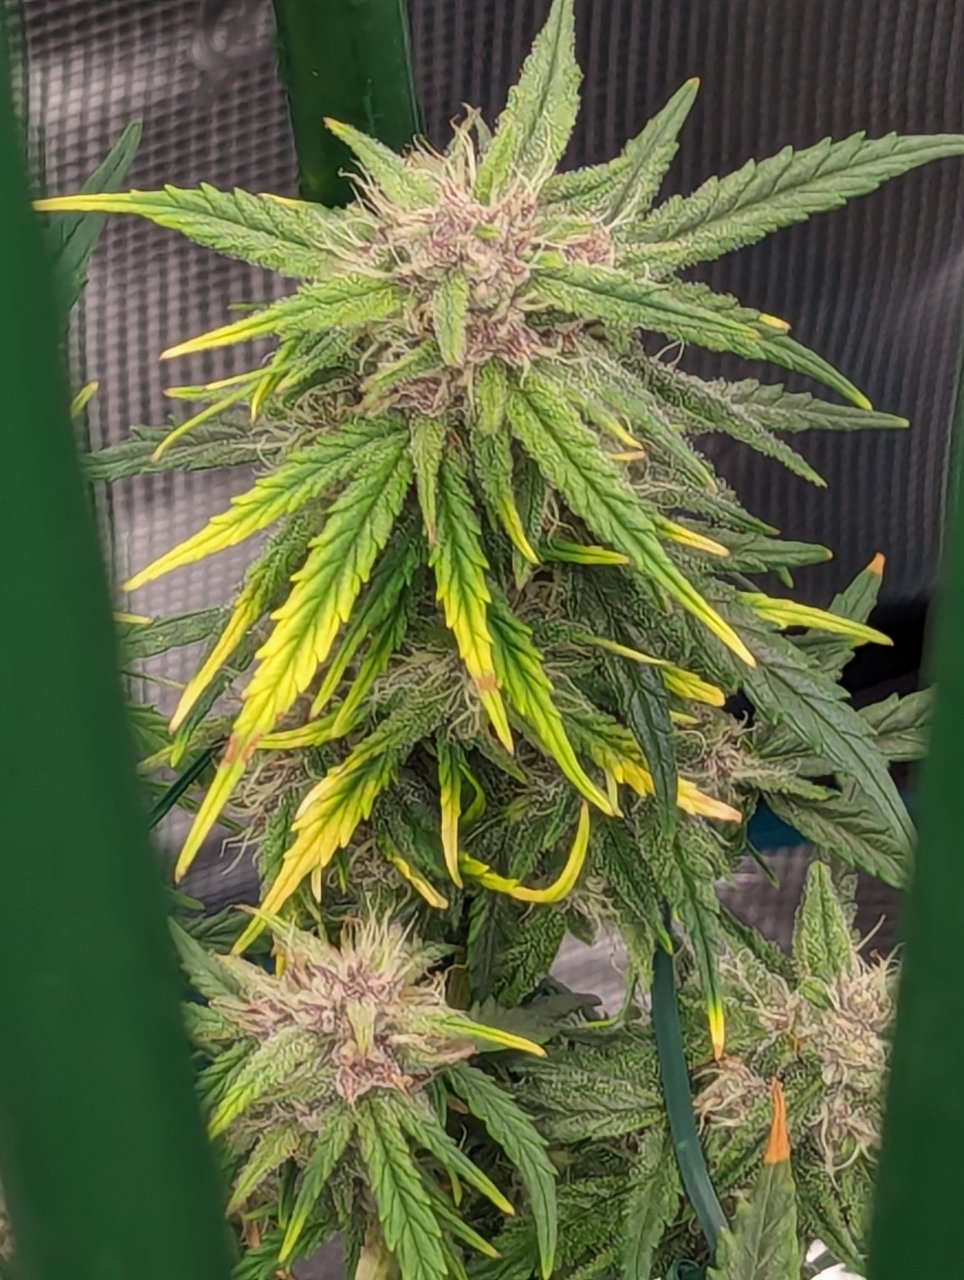 Queen started growing healthy leaves again on a cola with severe root damage.